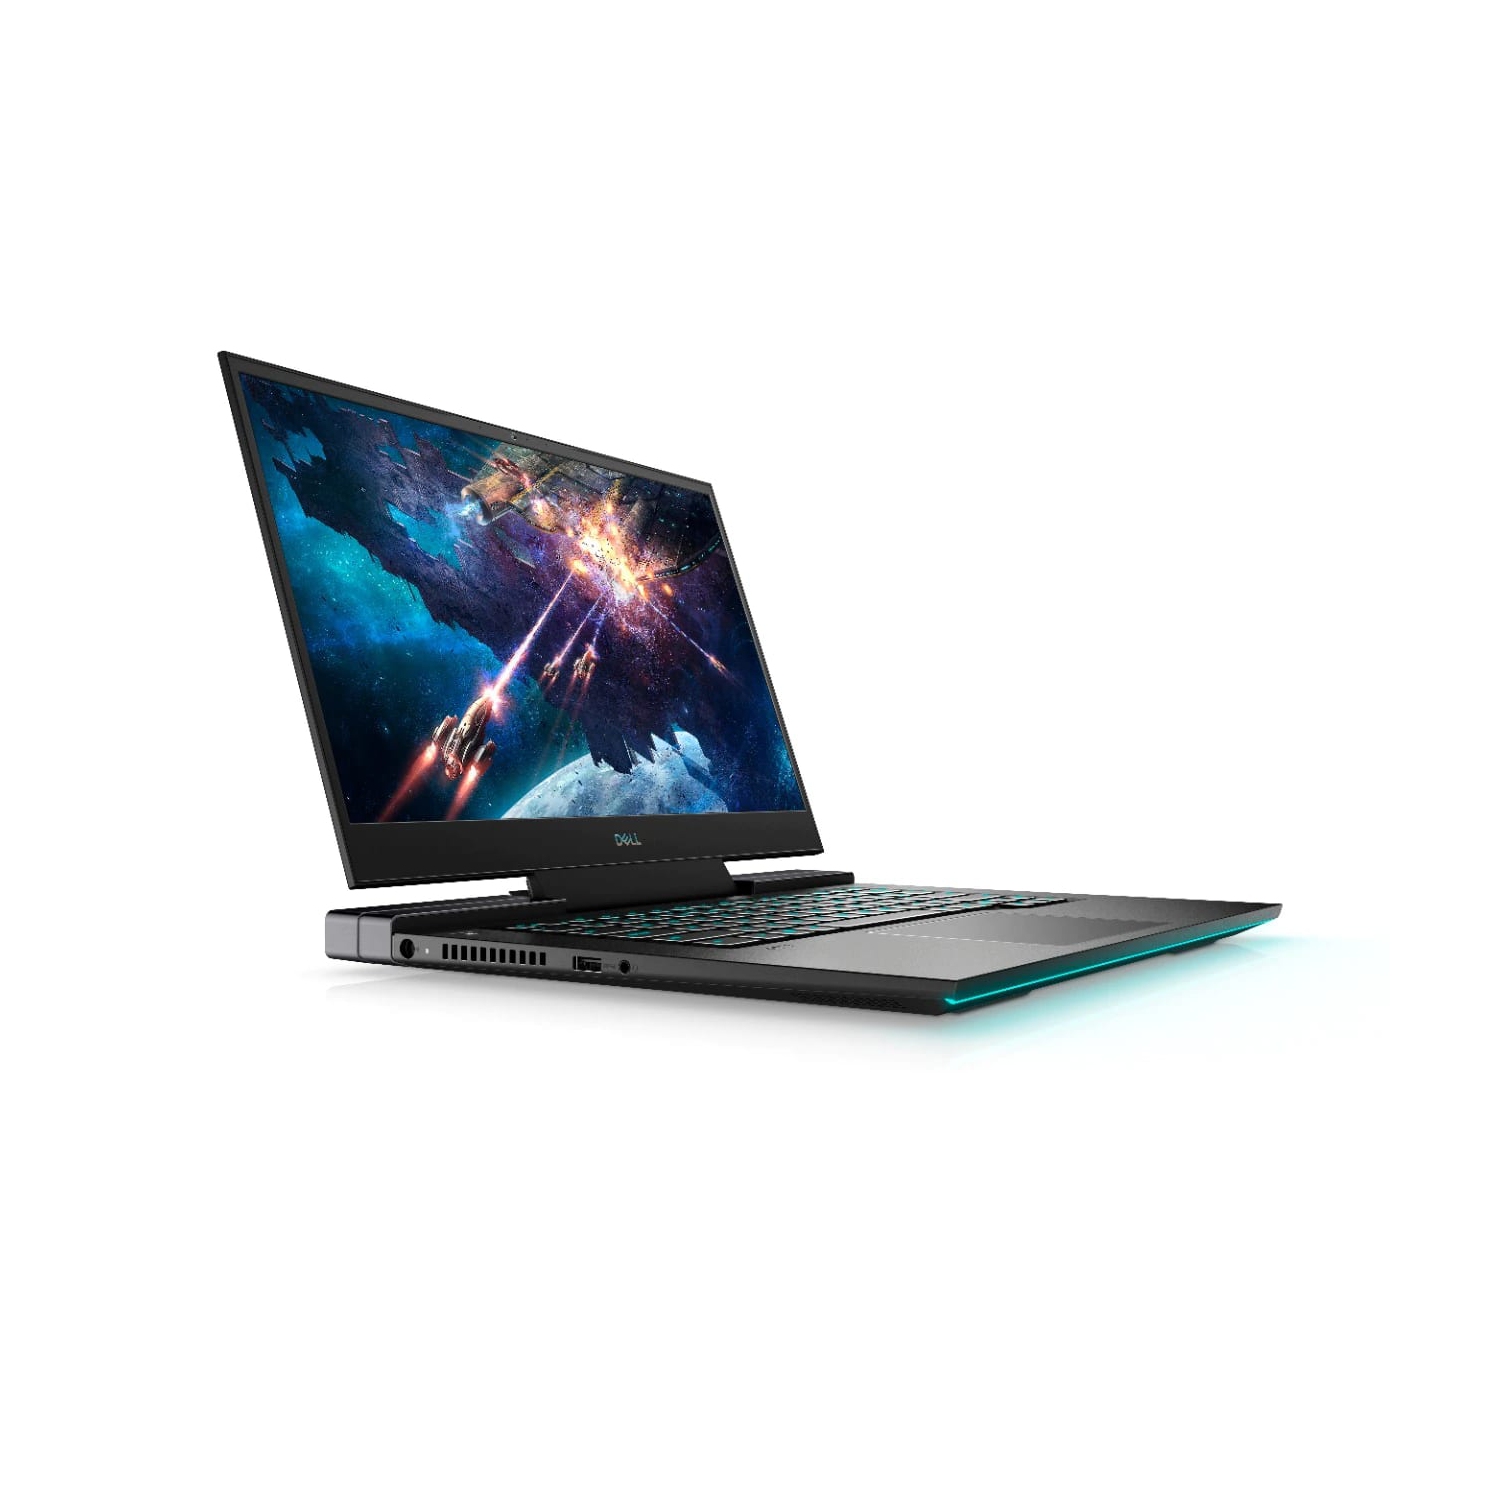 Refurbished (Excellent) - Dell G7 15 7500 Gaming Laptop (2020), 15.6" FHD, Core i7 - 1TB SSD - 16GB RAM - RTX 2060, 6 Cores @ 5 GHz - 10th Gen CPU Certified Refurbished